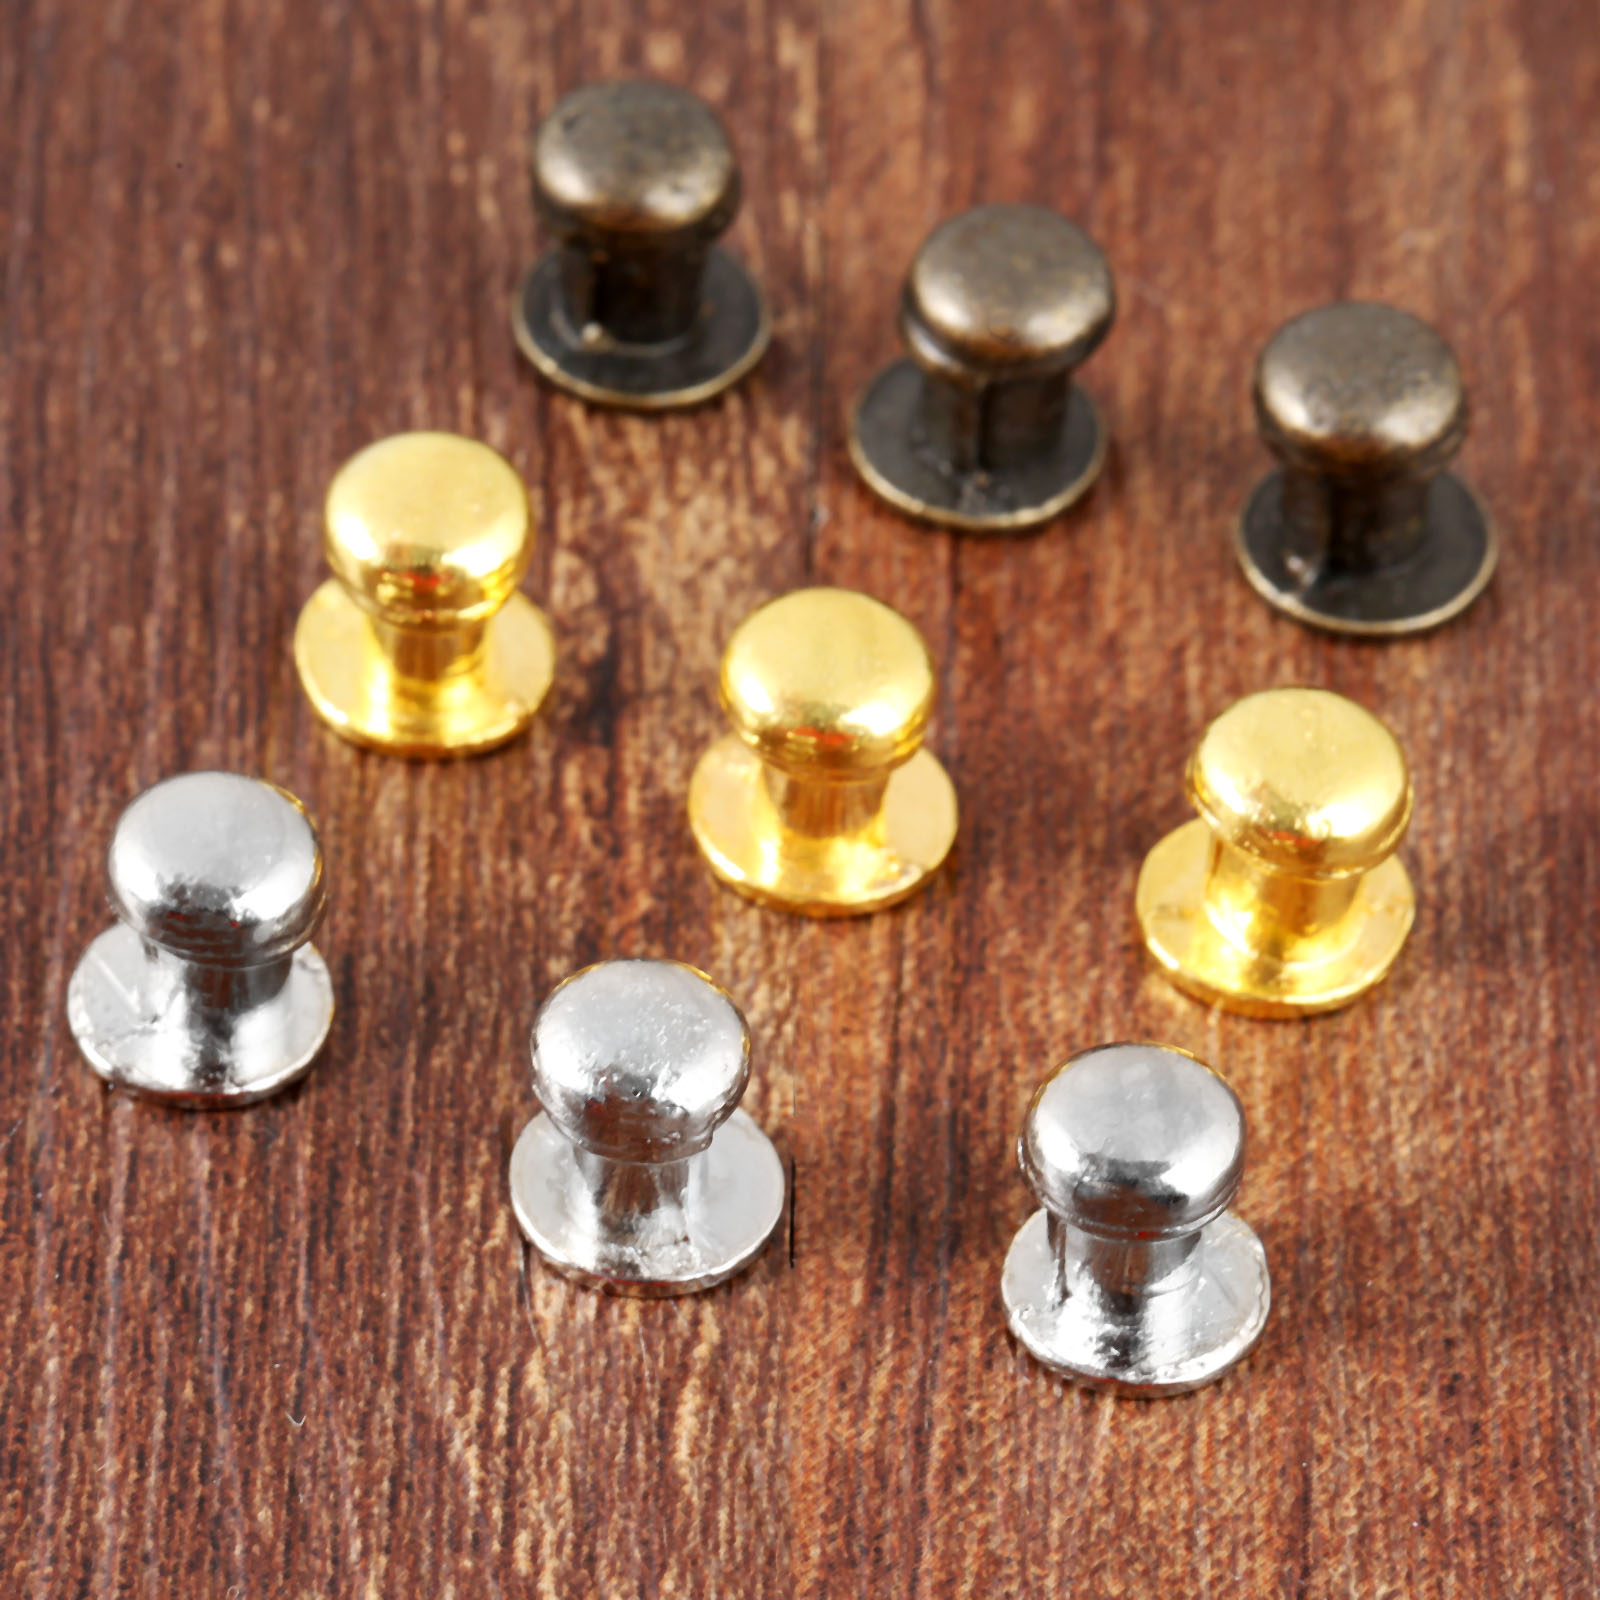 10pcs/lot Mini Knobs Small Handles 7mm*10mm Pull Antique Bronze/Silver/Gold Jewelry Wooden Box Drawer Cabinet Hardware w/screw